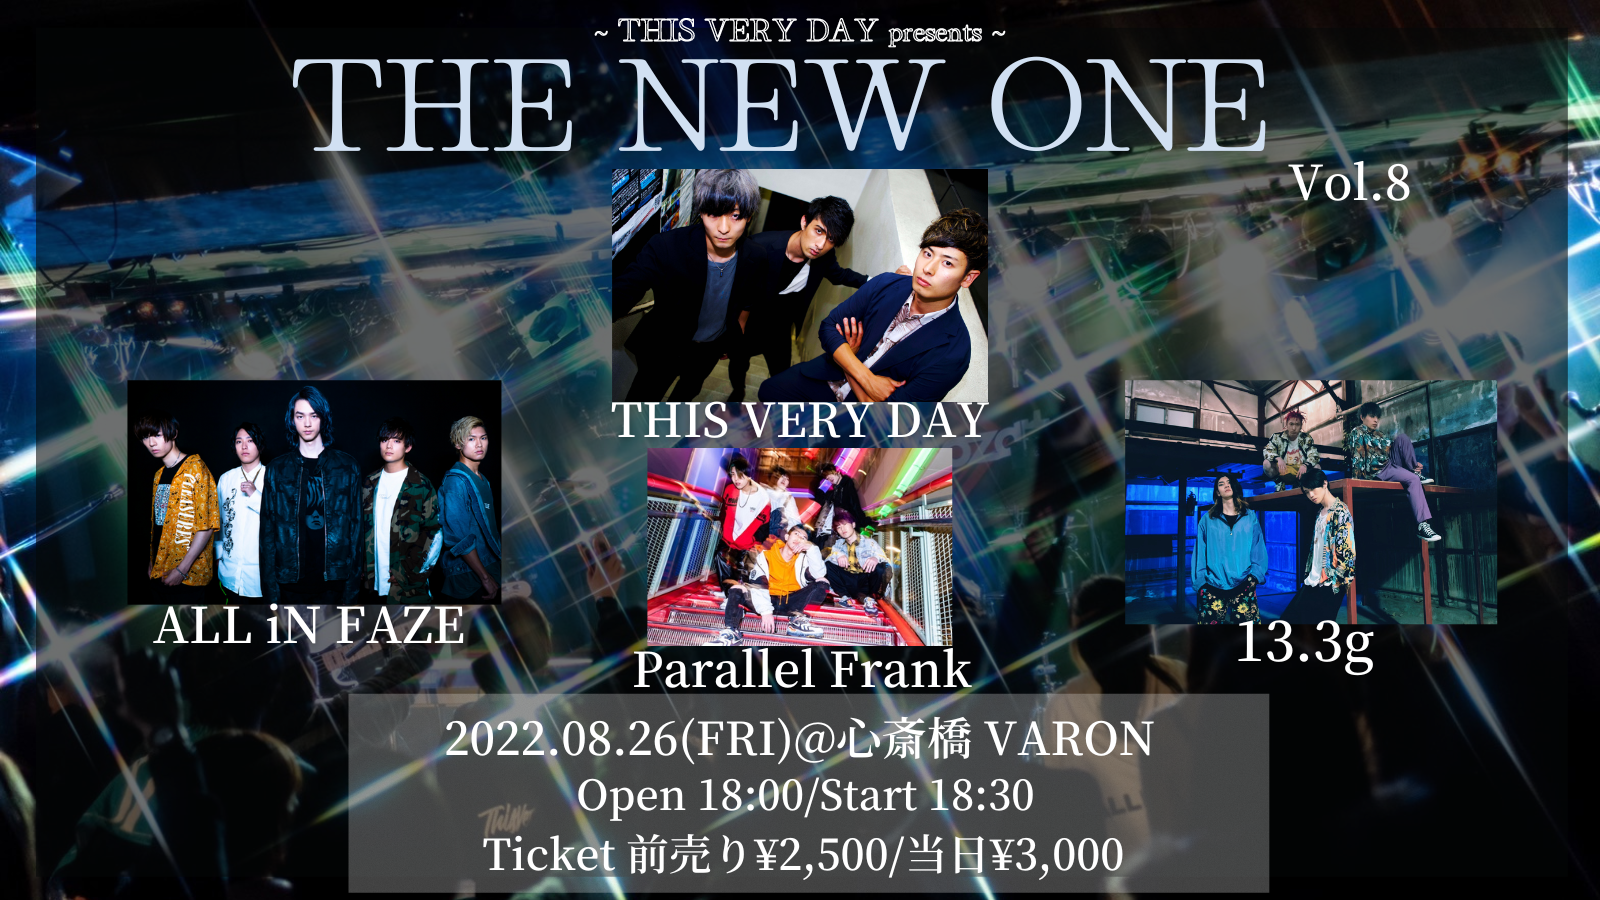 THIS VERY DAY presents.THE NEW ONE Vol.8